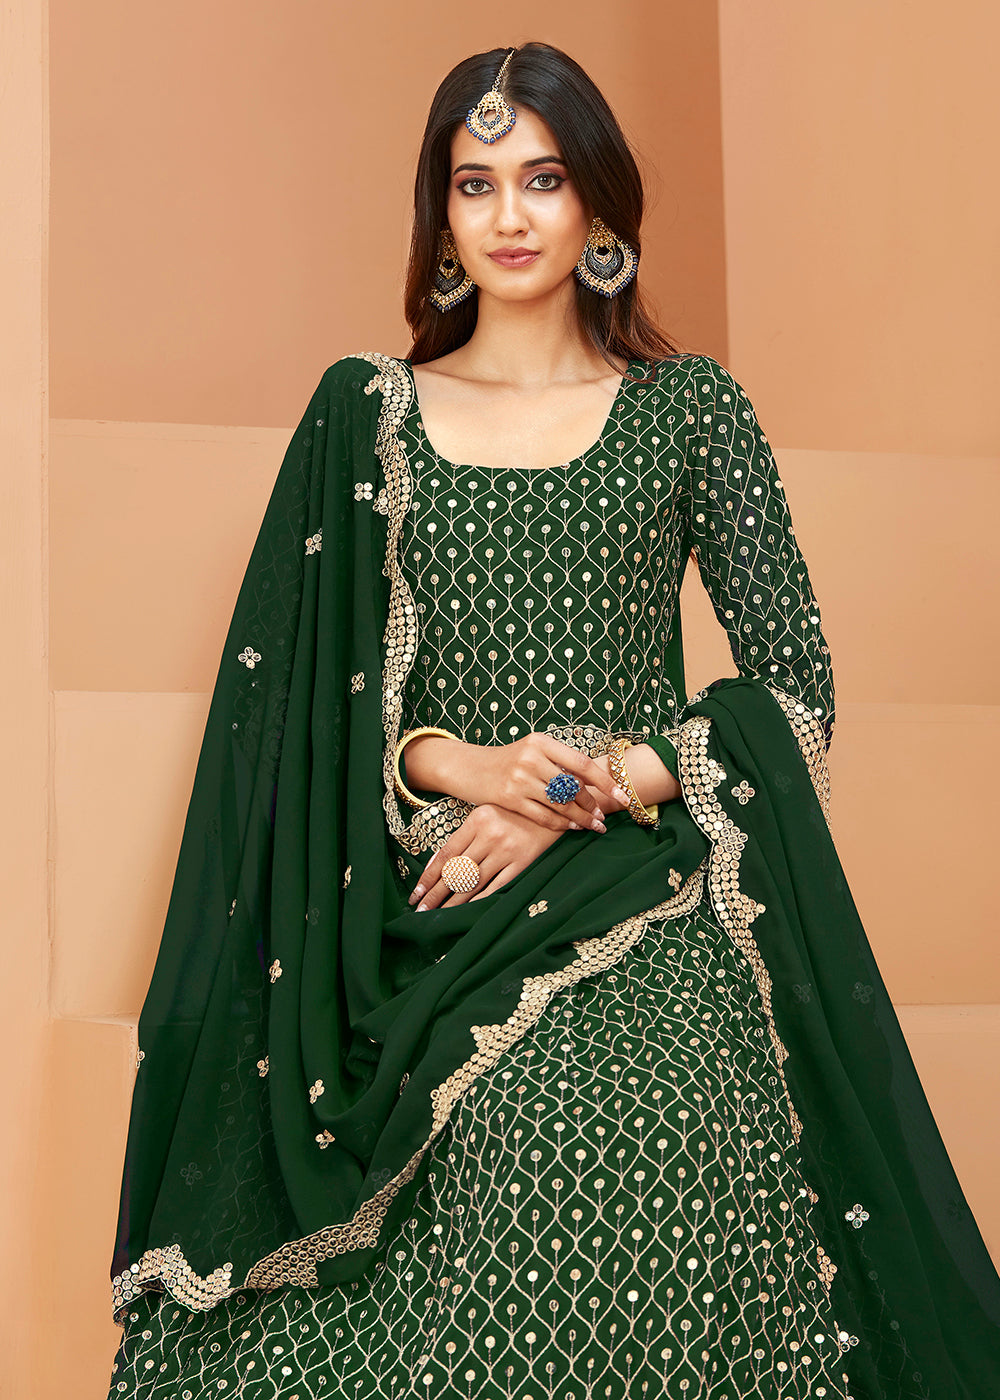 Buy Now Faux Georgette Radiant Dark Green Sequins Anarkali Suit Online in USA, UK, Australia, New Zealand, Canada, Italy & Worldwide at Empress Clothing. 